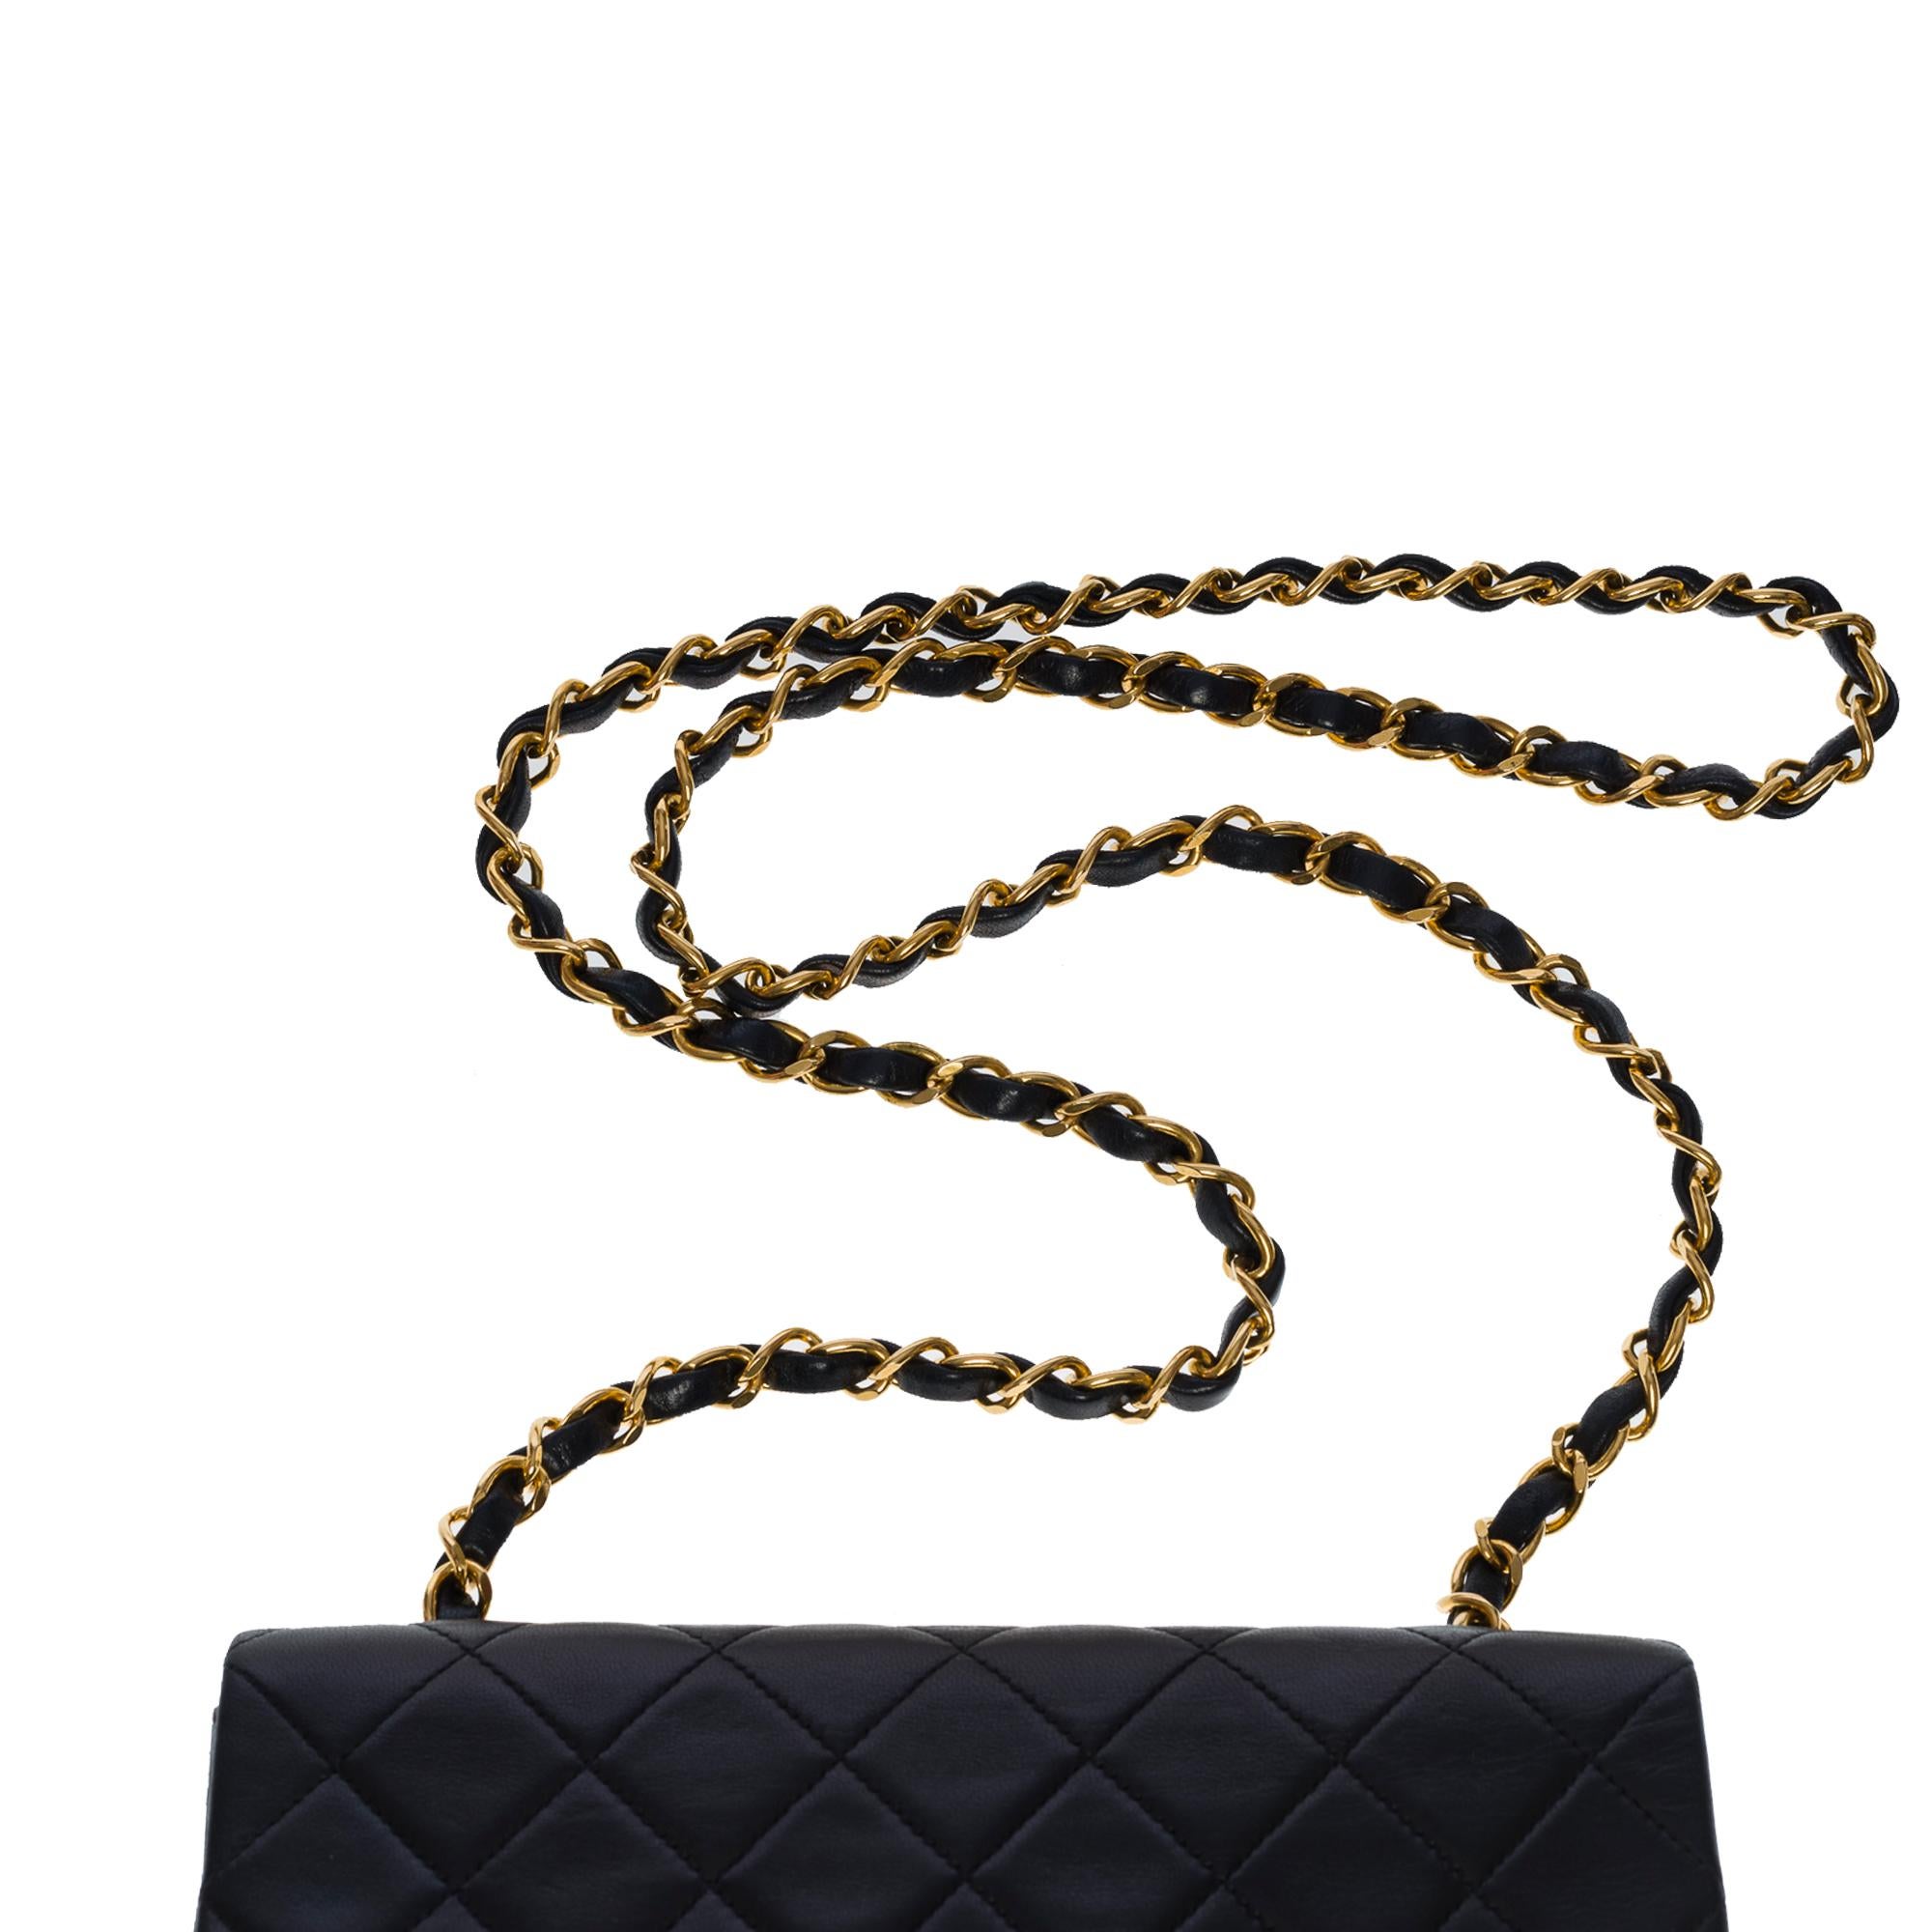 Chanel Timeless Mini Square Flap shoulder bag in black quilted lambskin, GHW 4